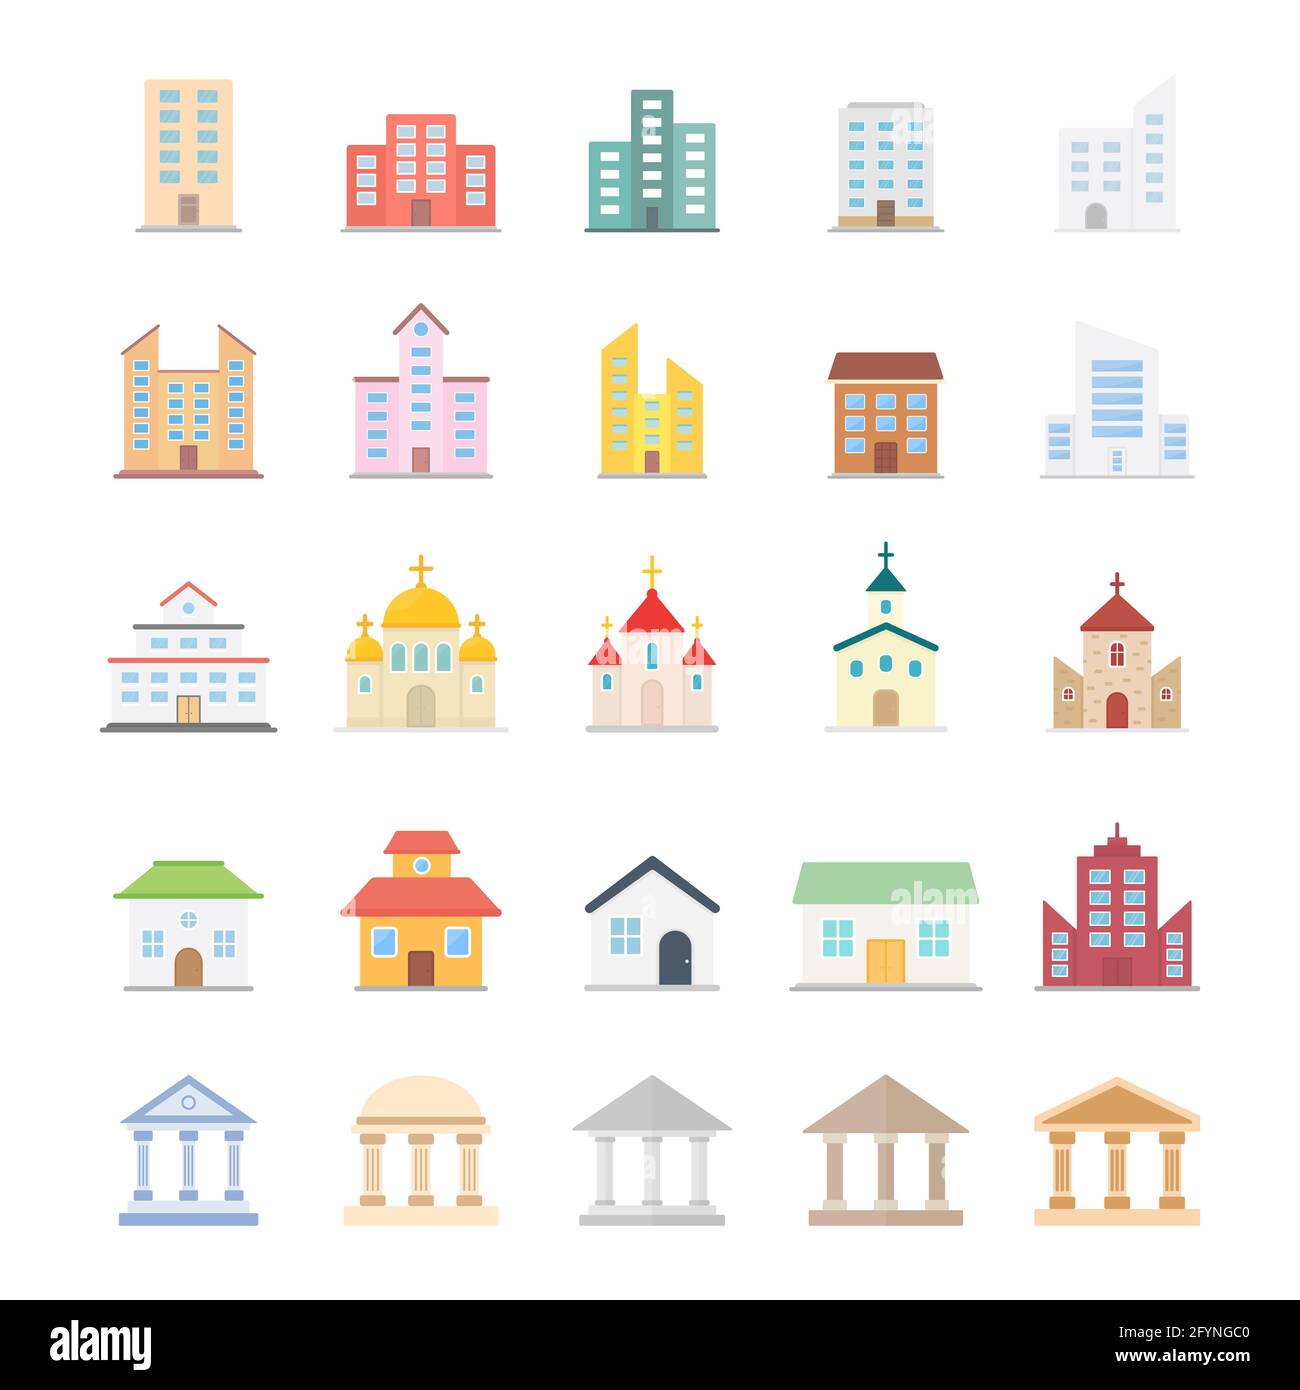 Building icon large set. Houses, churches, museums and universities. Modern buildings and estate symbol colorful collection. Stock Vector